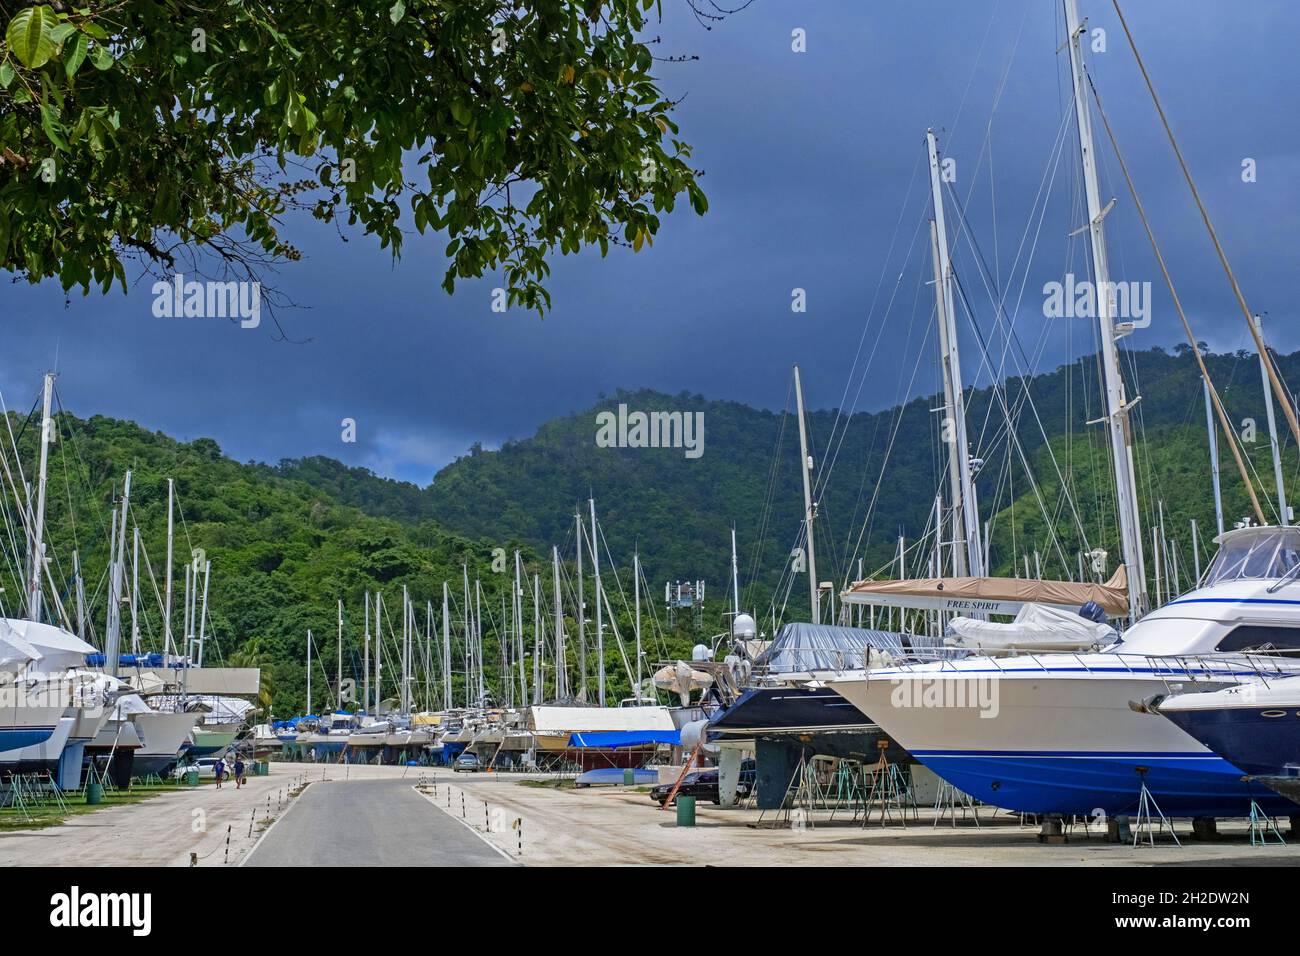 Yachts and sailing boats on dry dock in the harbour of Chaguaramas near Port of Spain during hurricane season, Trinidad and Tobago in the Caribbean Stock Photo